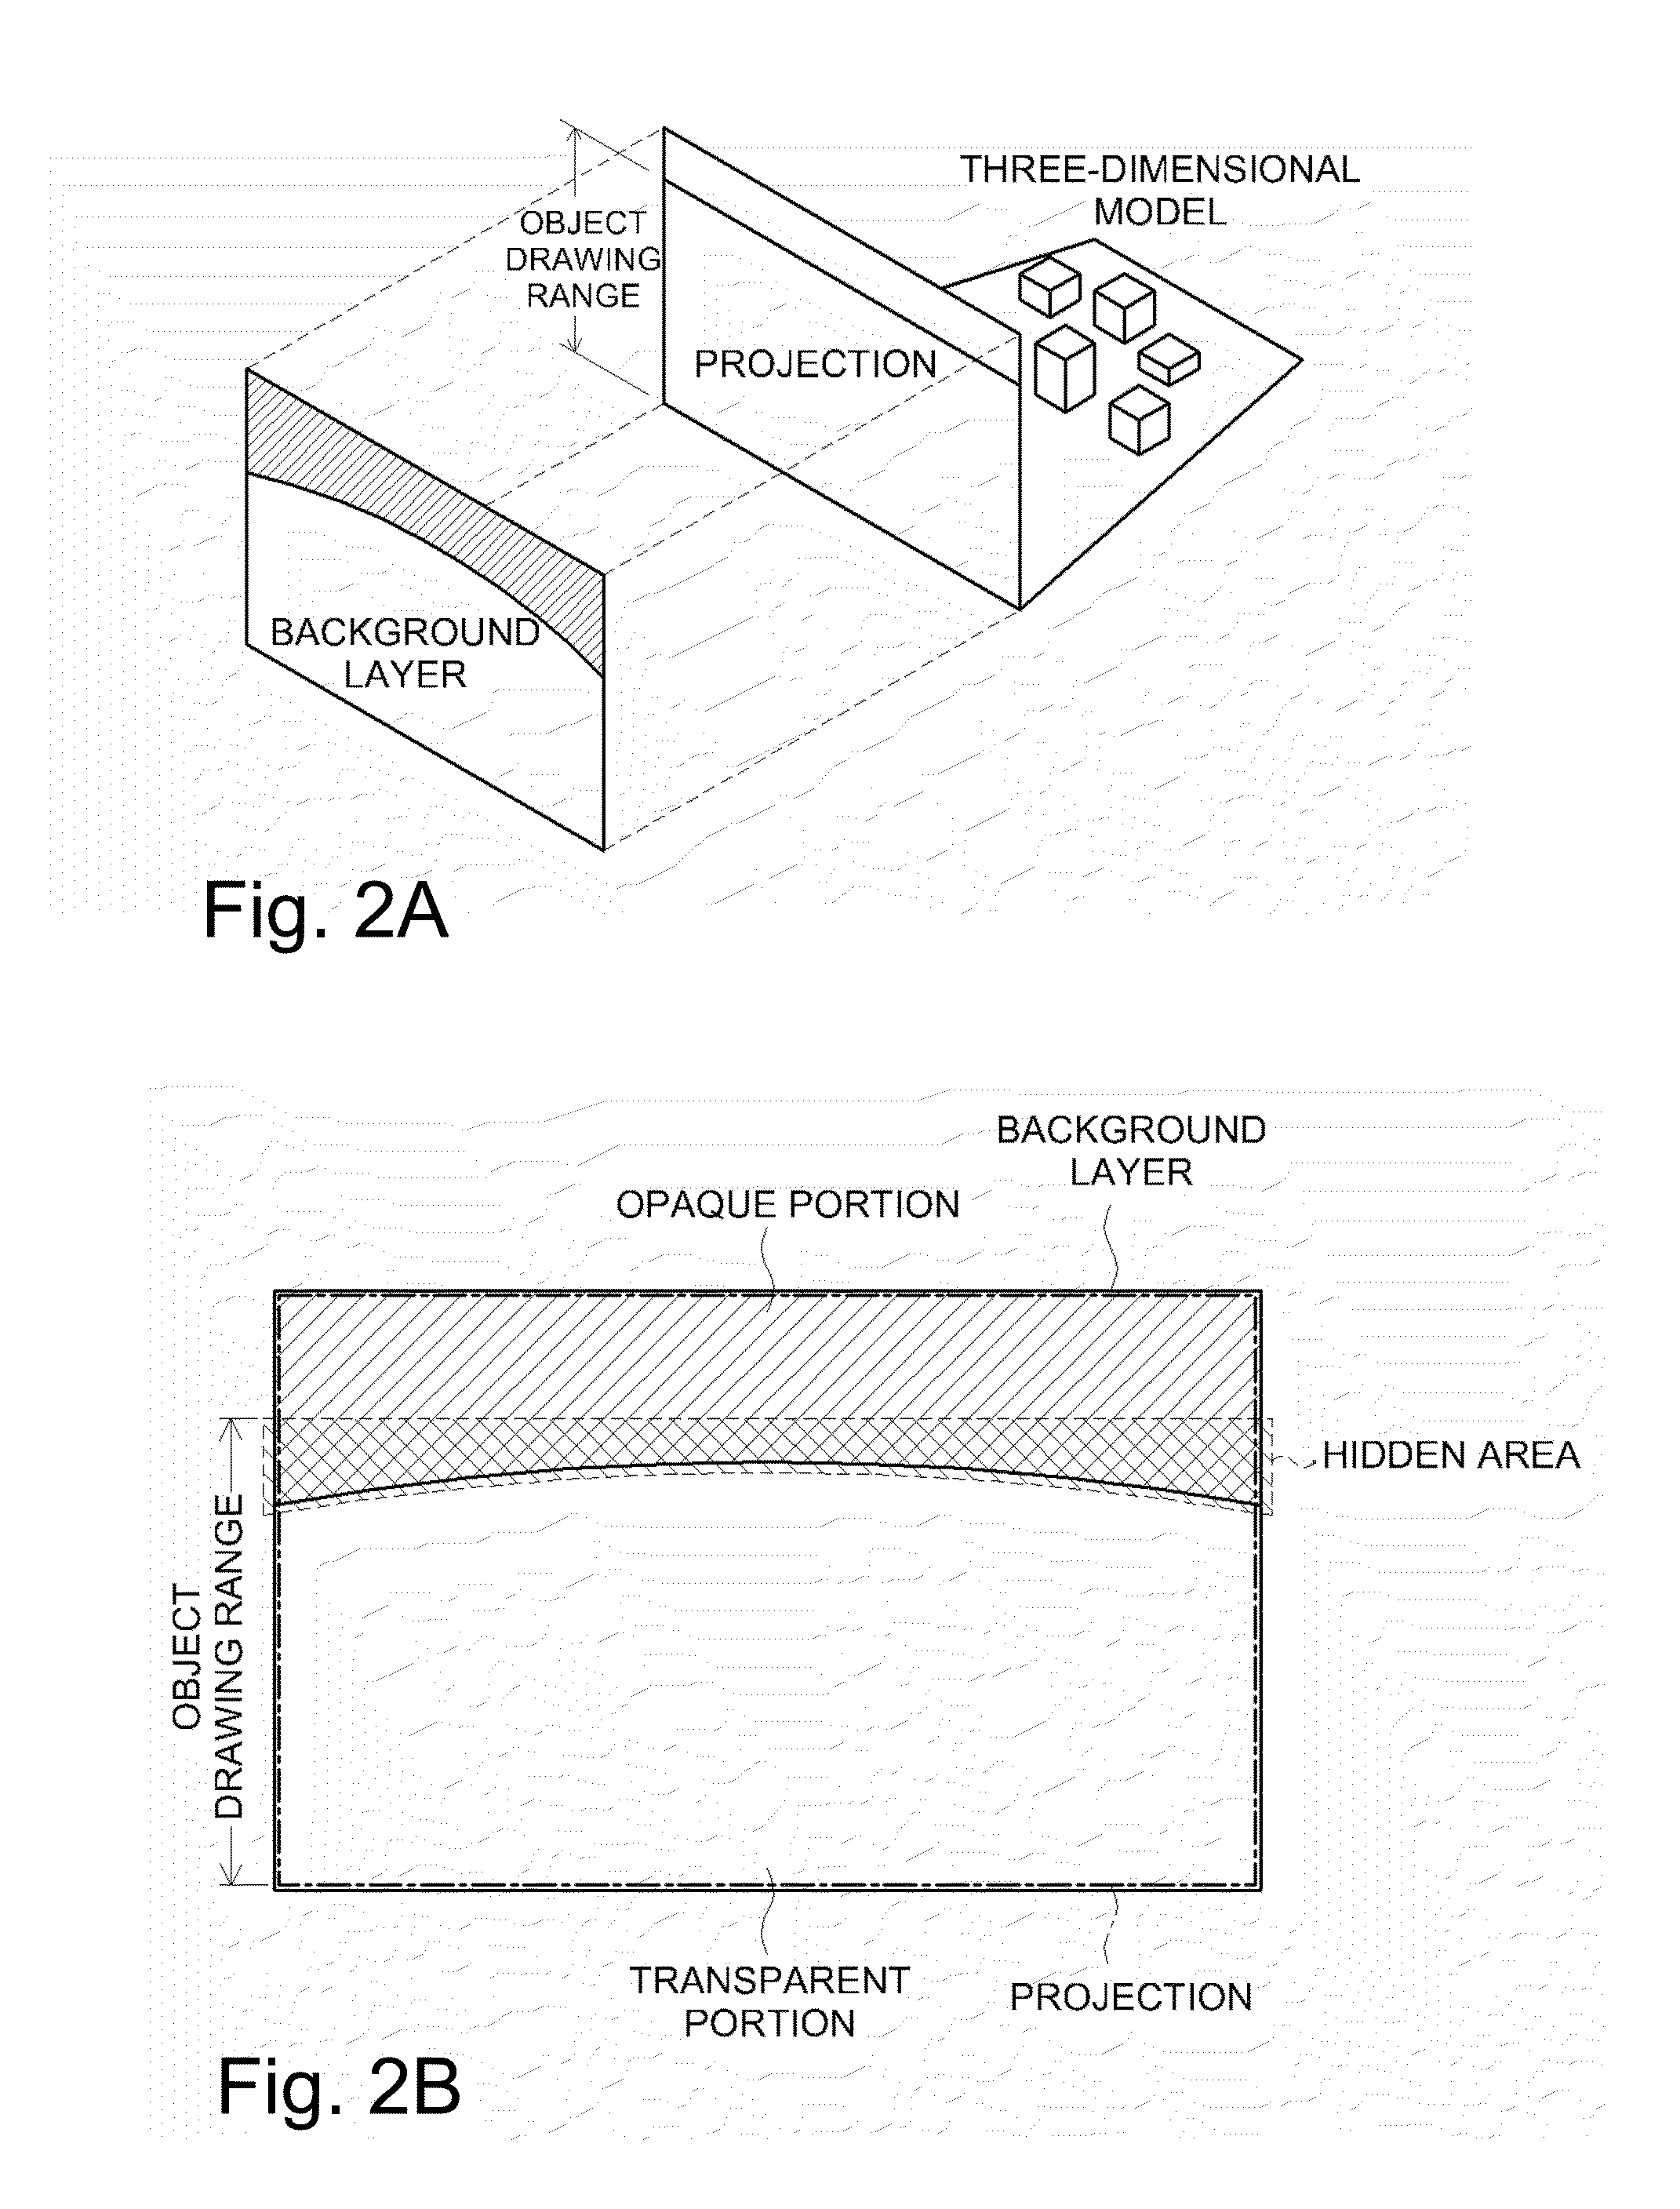 Three-dimensional image output device and background image generation device